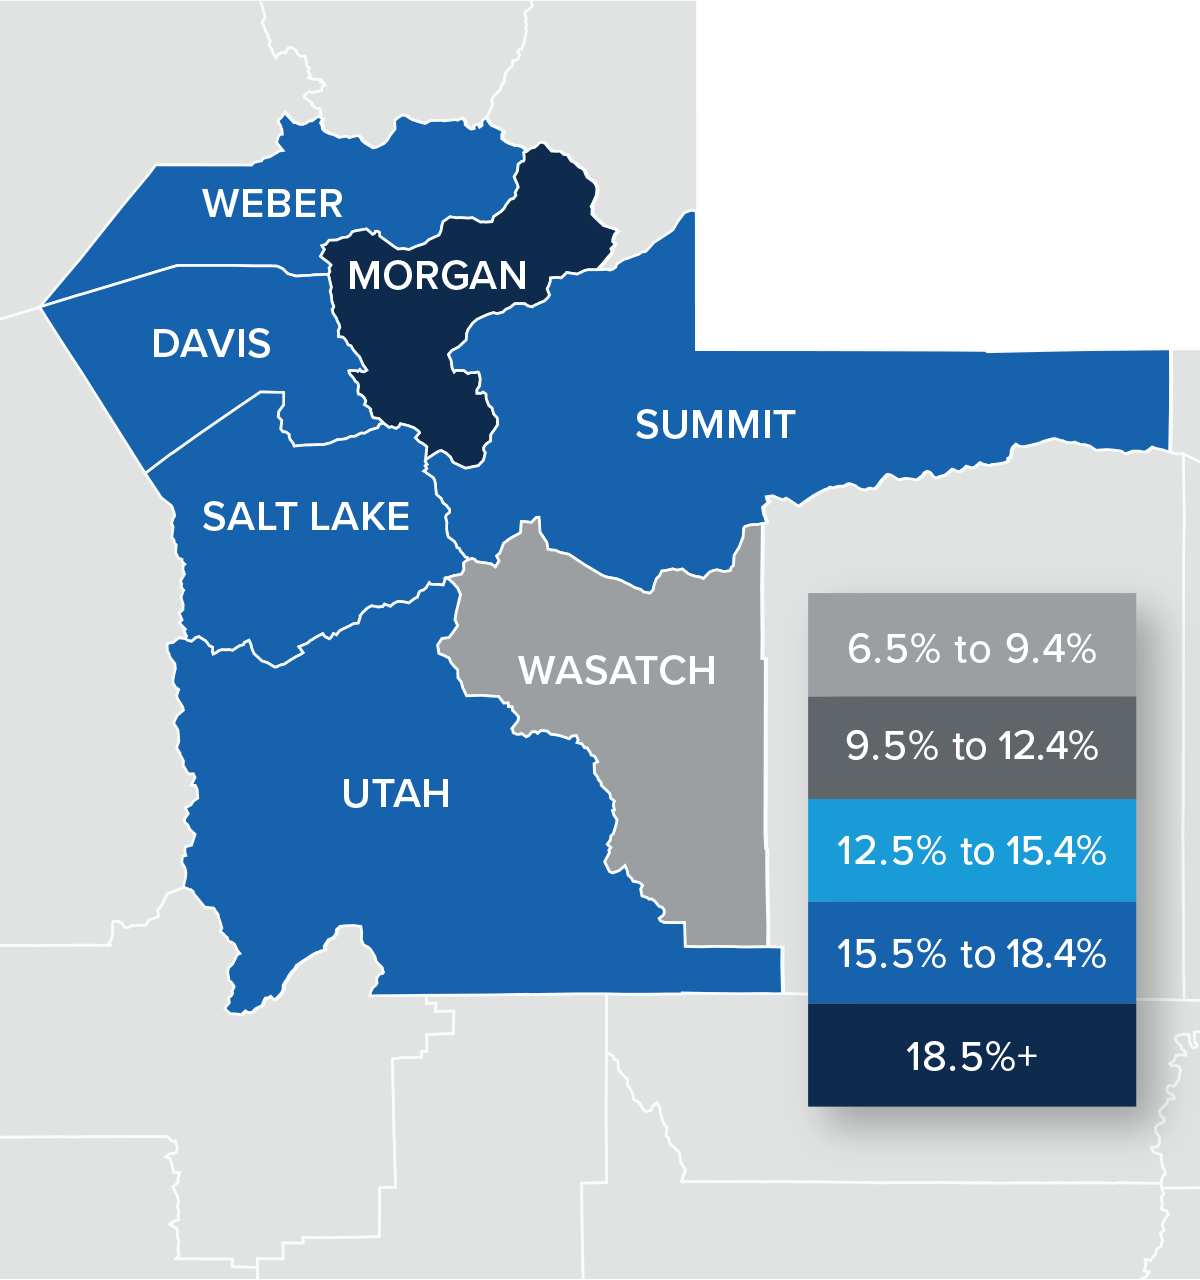 A map showing the real estate home prices percentage changes for various counties in Utah. Different colors correspond to different tiers of percentage change. Wasatch County is the the only county with a percentage change in the 6.5% to 9.4% range, while Weber, Davis, Salt Lake, Utah, and Summit are in the 15.5% to 18.4% change range. Morgan County is the only county in the 18.5% + change range.